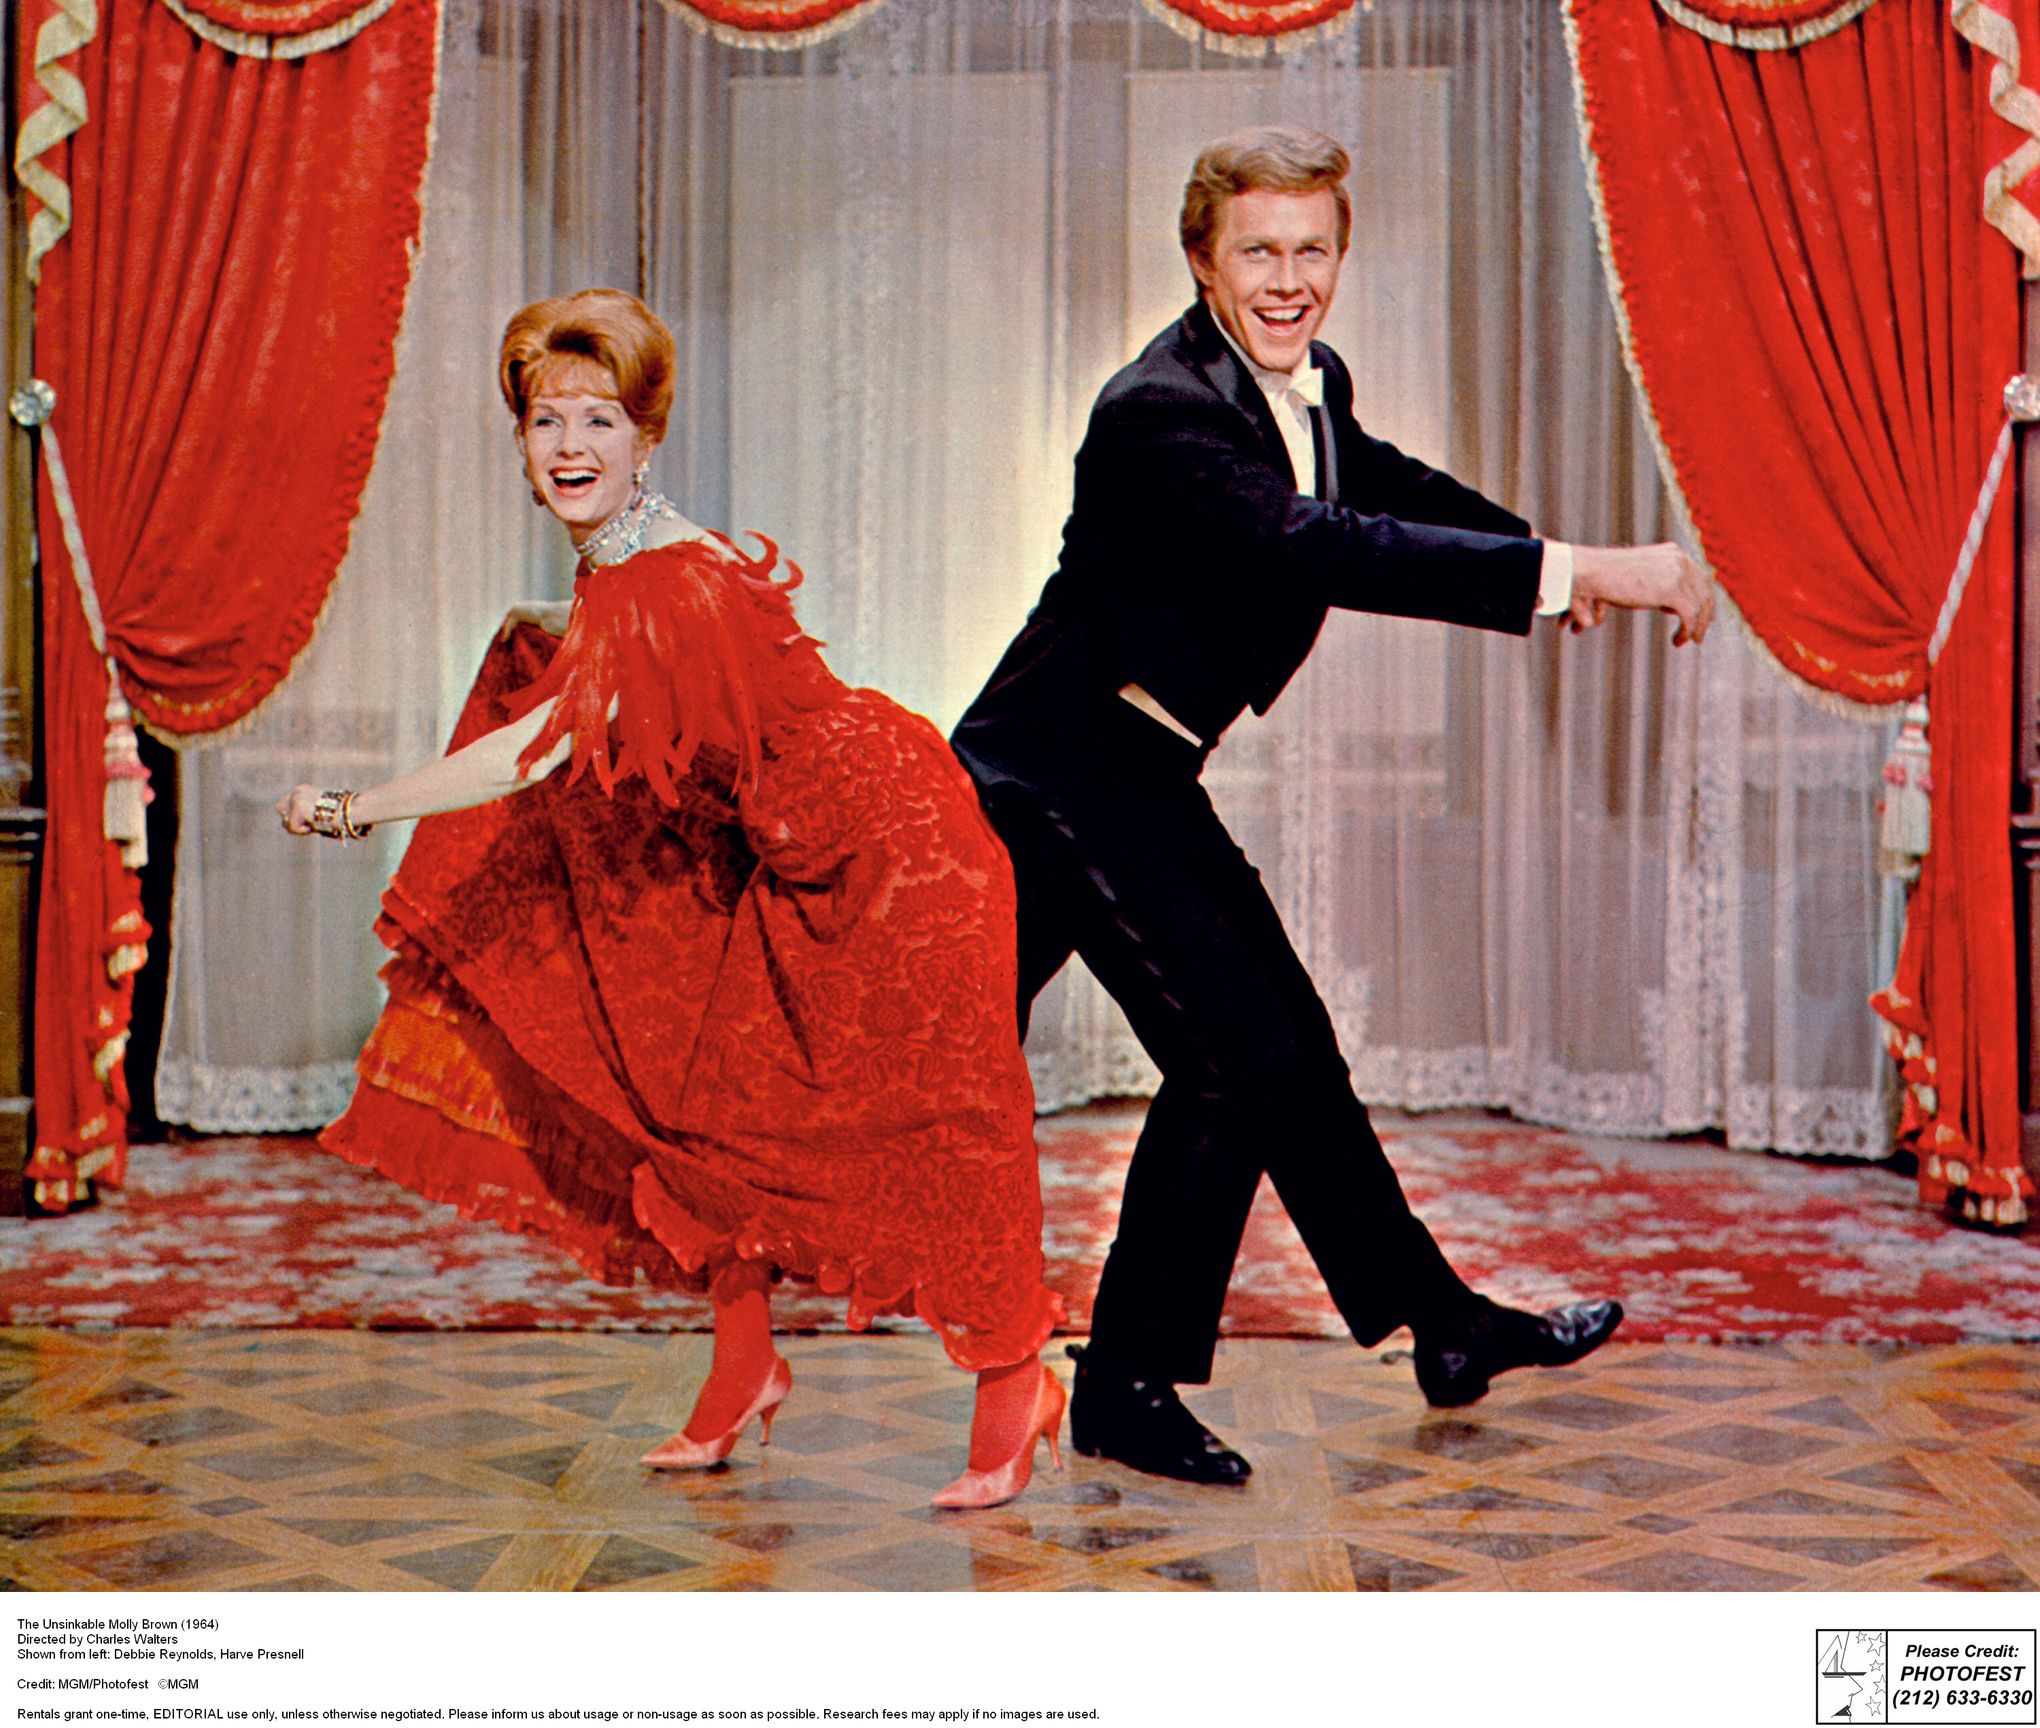 The Unsinkable Molly Brown (1964) - Turner Classic Movies